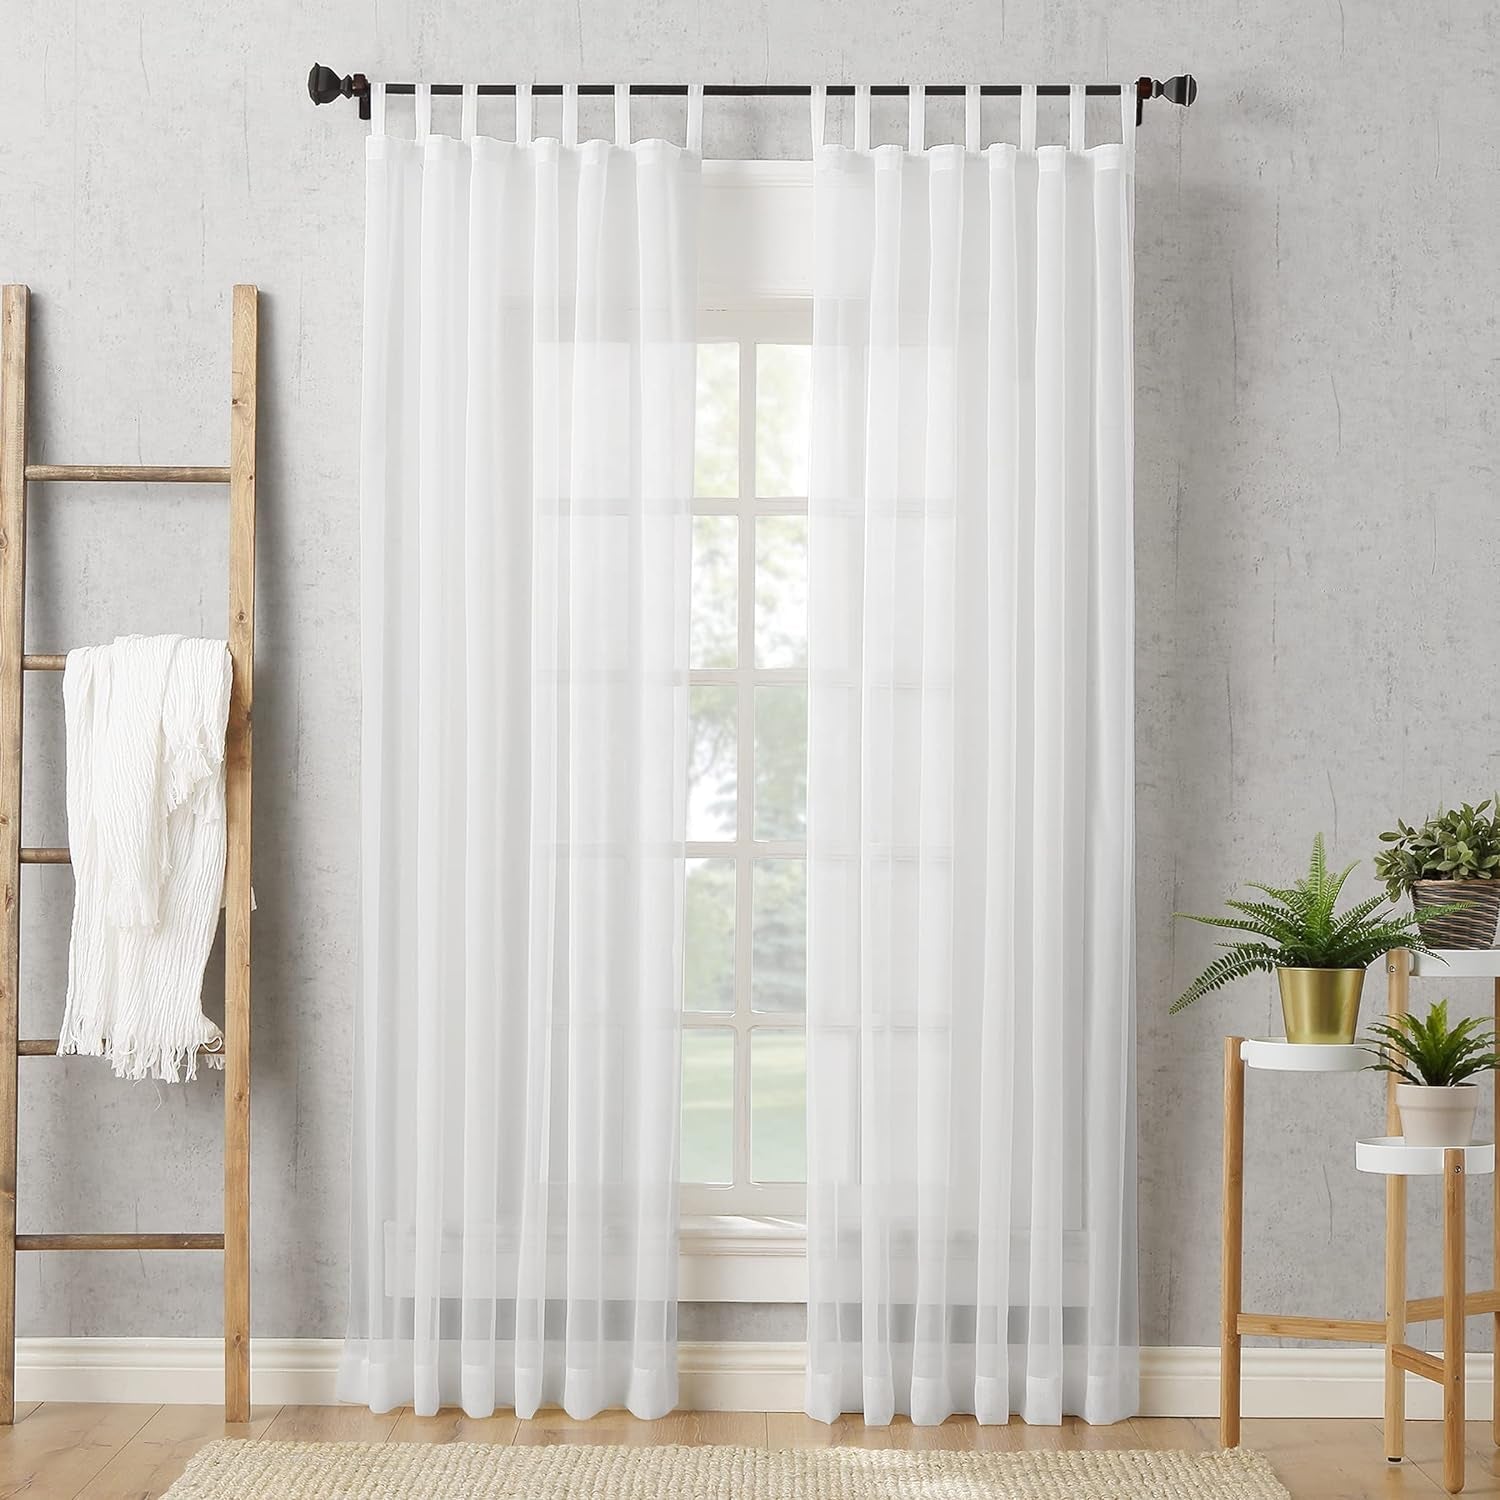 No. 918 Emily Sheer Voile Tab Top Curtain Panel, 59" X 84", White